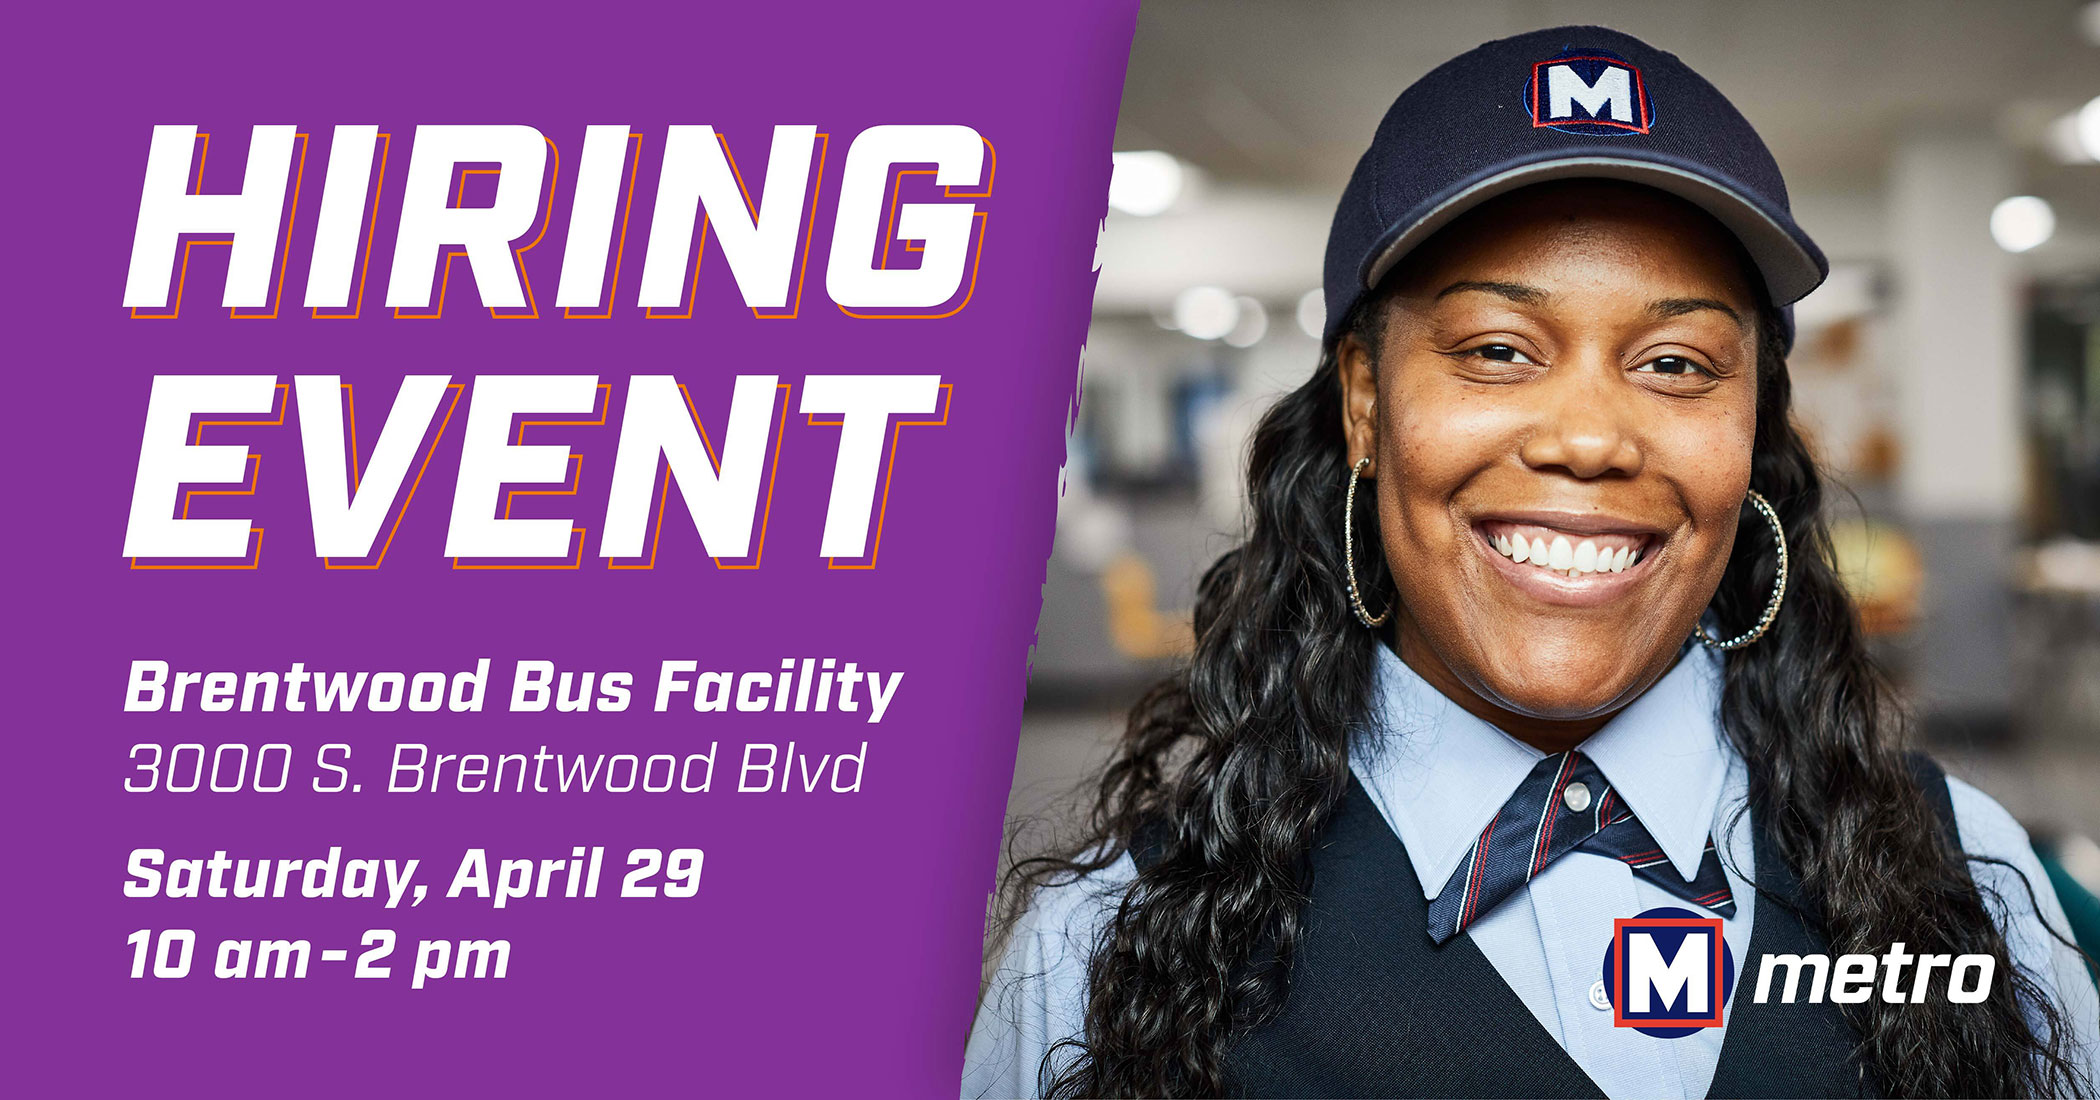 HIRING EVENT: Saturday April 29 from 10 a.m. to 2 p.m. at our Brentwood MetroBus Facility, 3000 South Brentwood Boulevard